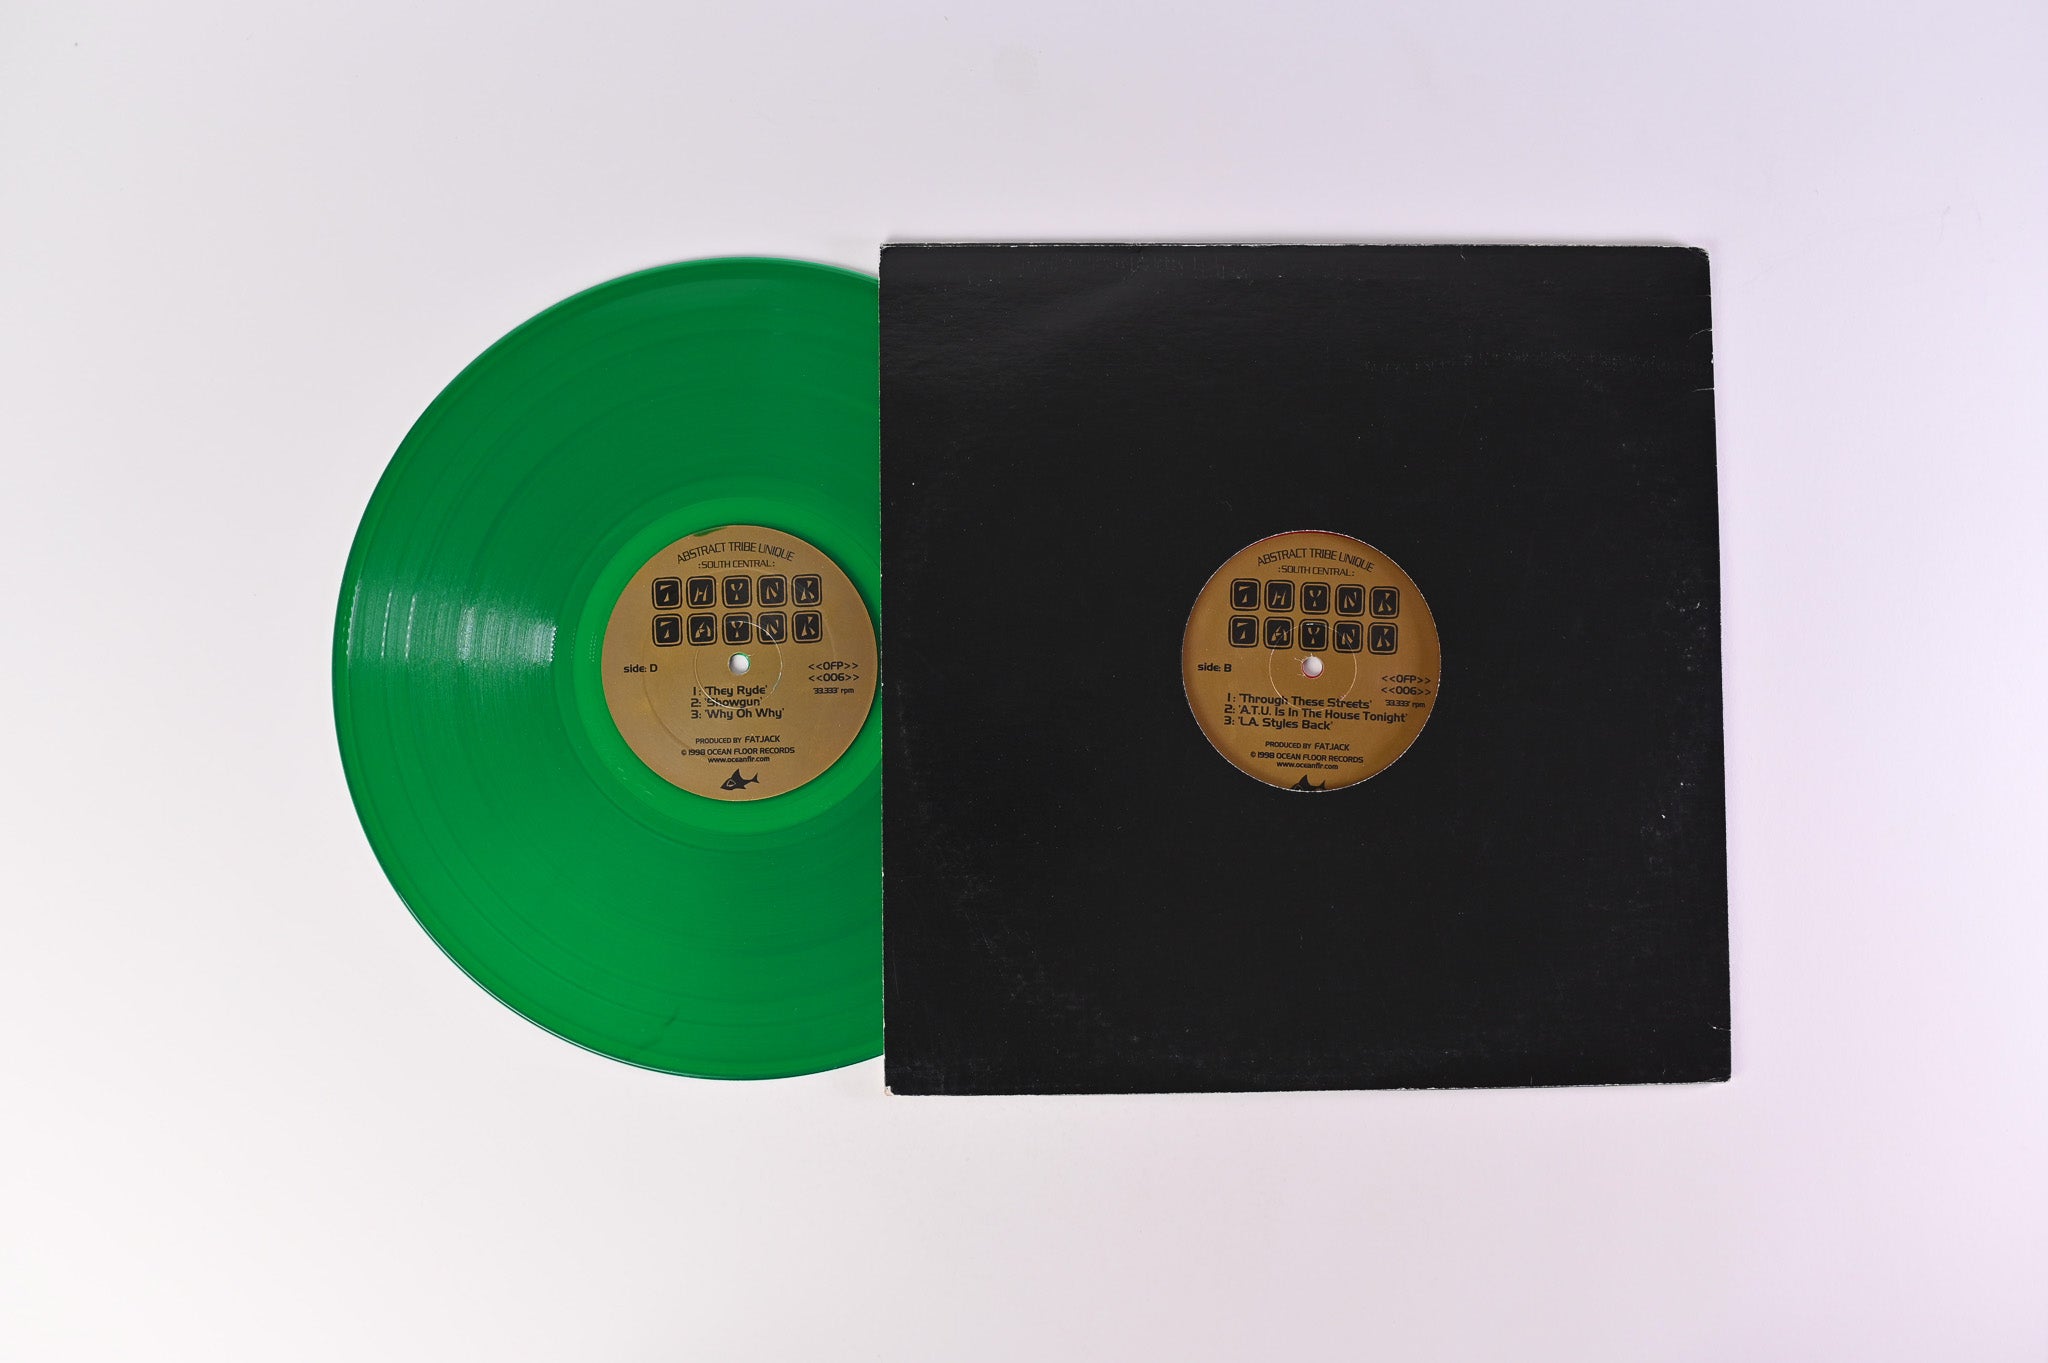 Abstract Tribe Unique - South Central Thynk Taynk on Ocean Floor Red and Green Vinyl